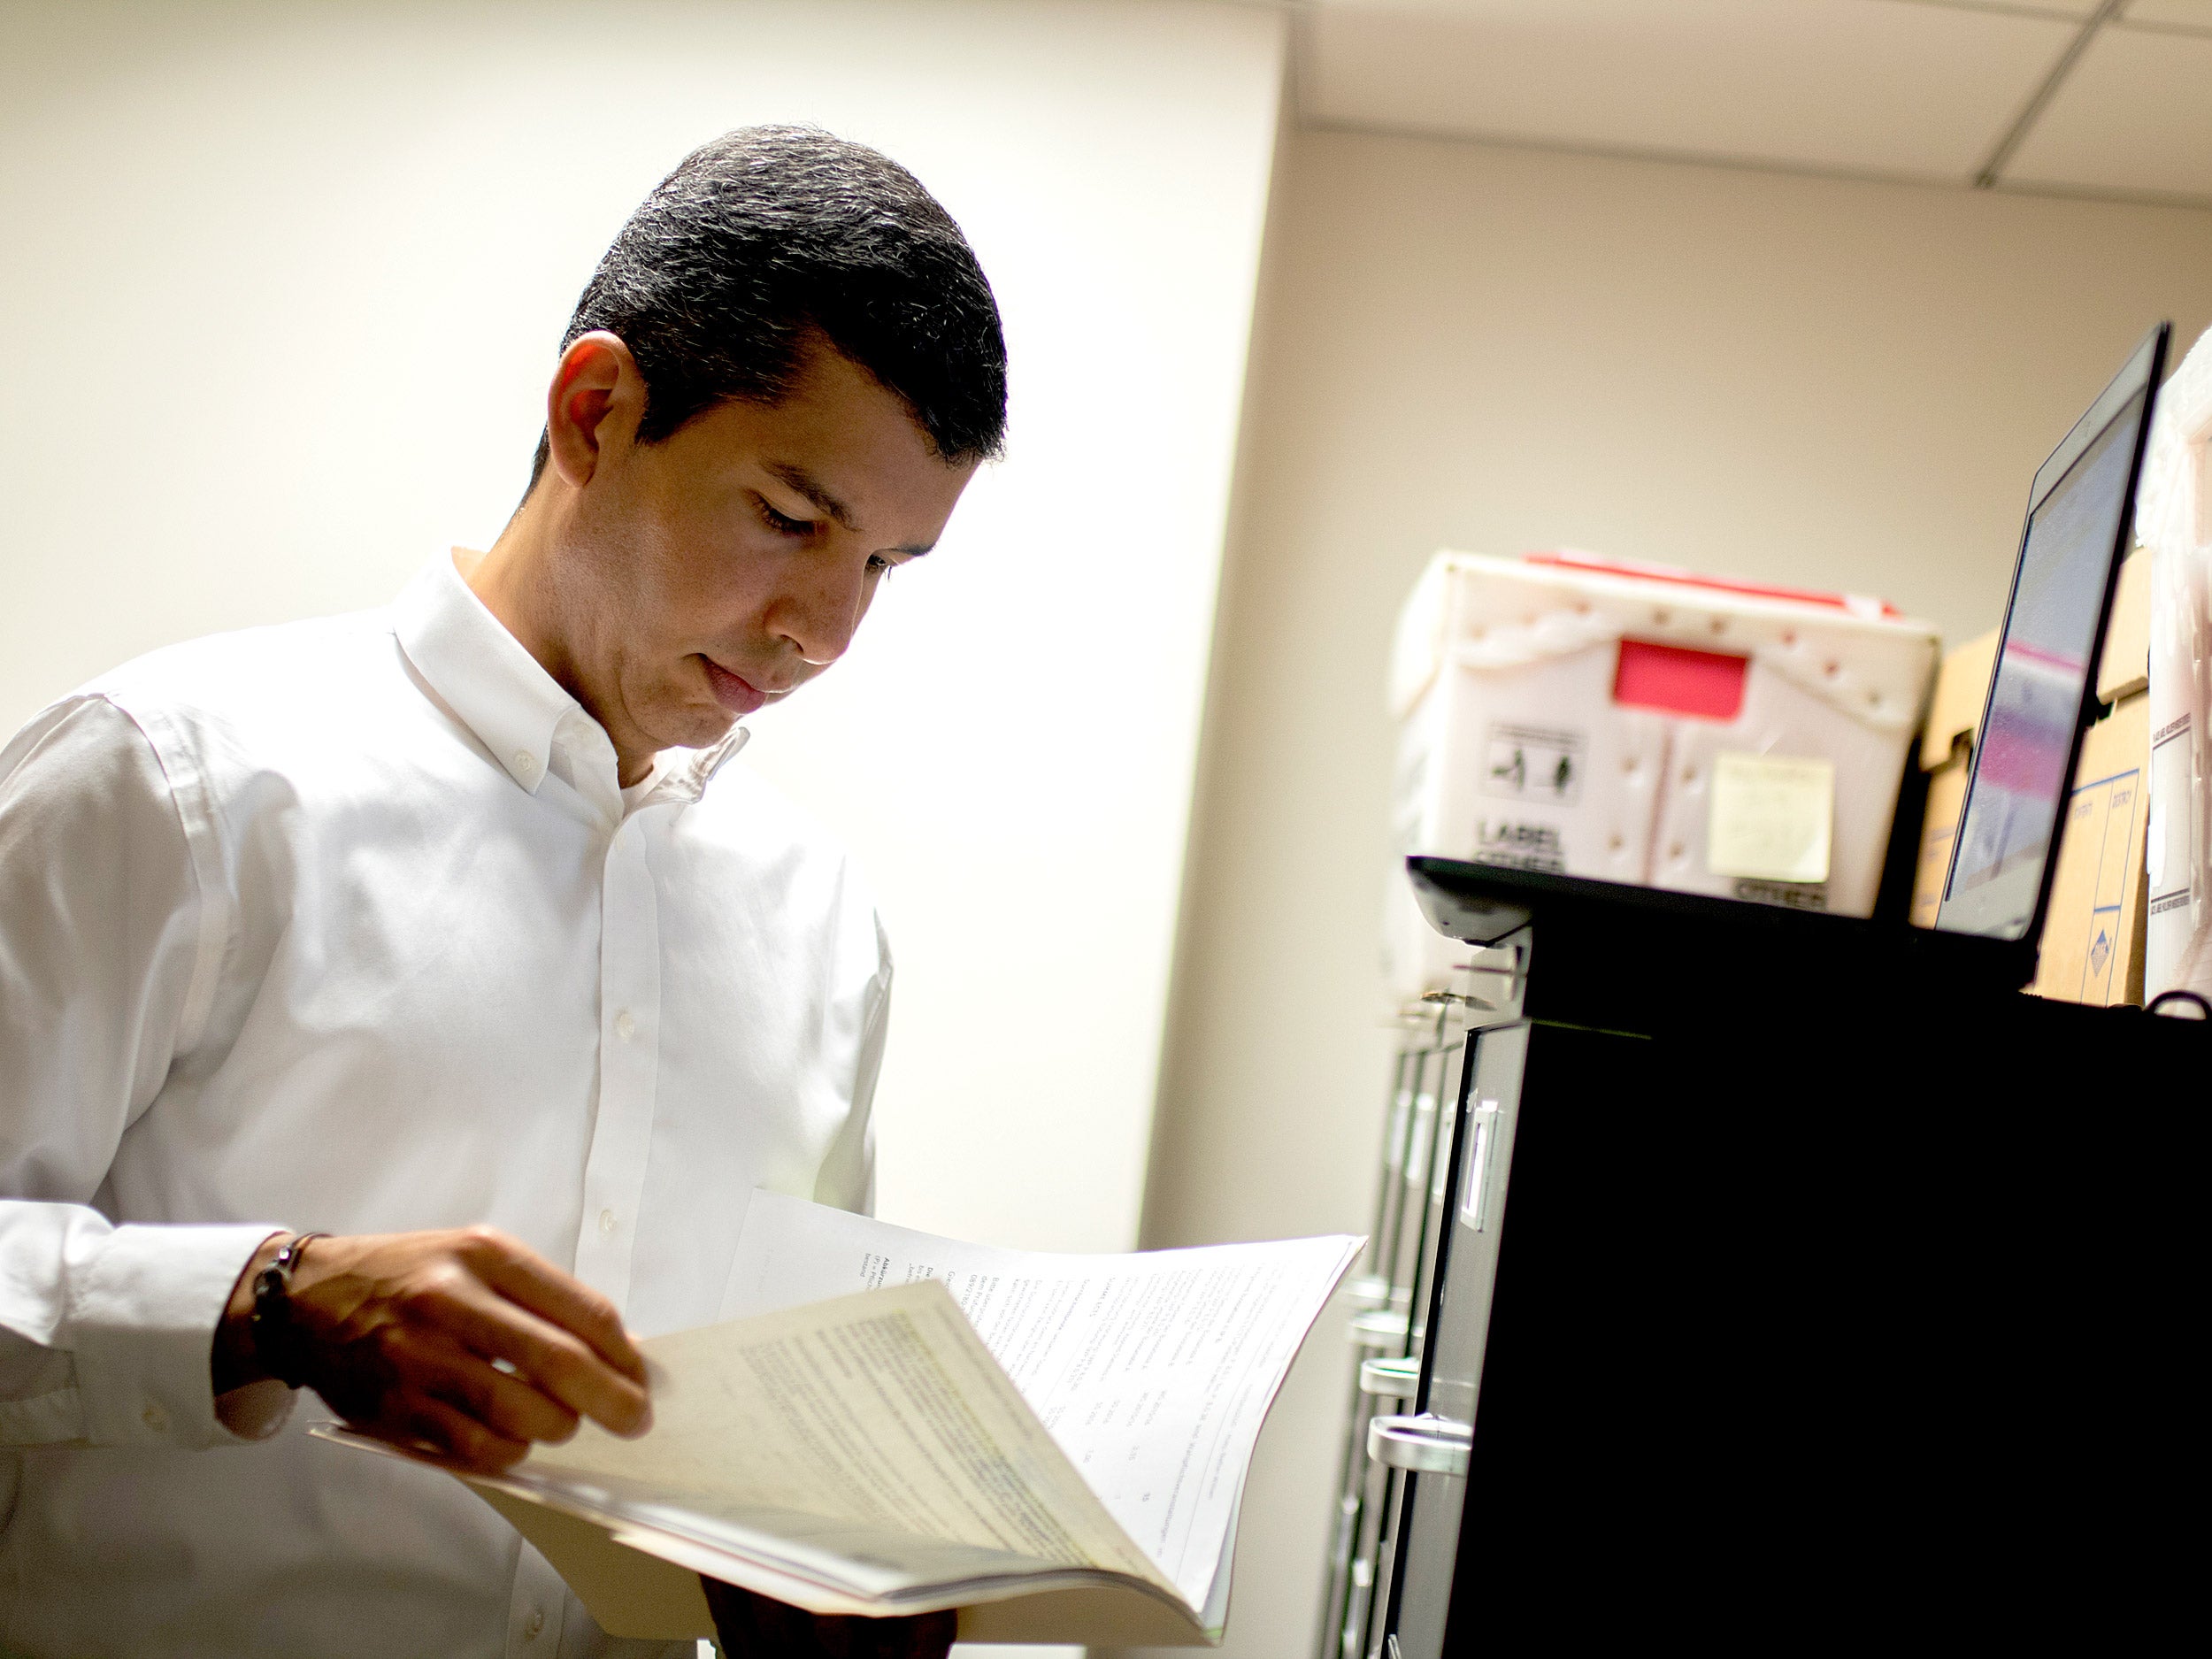 Salvador Peña looks at a file in an office